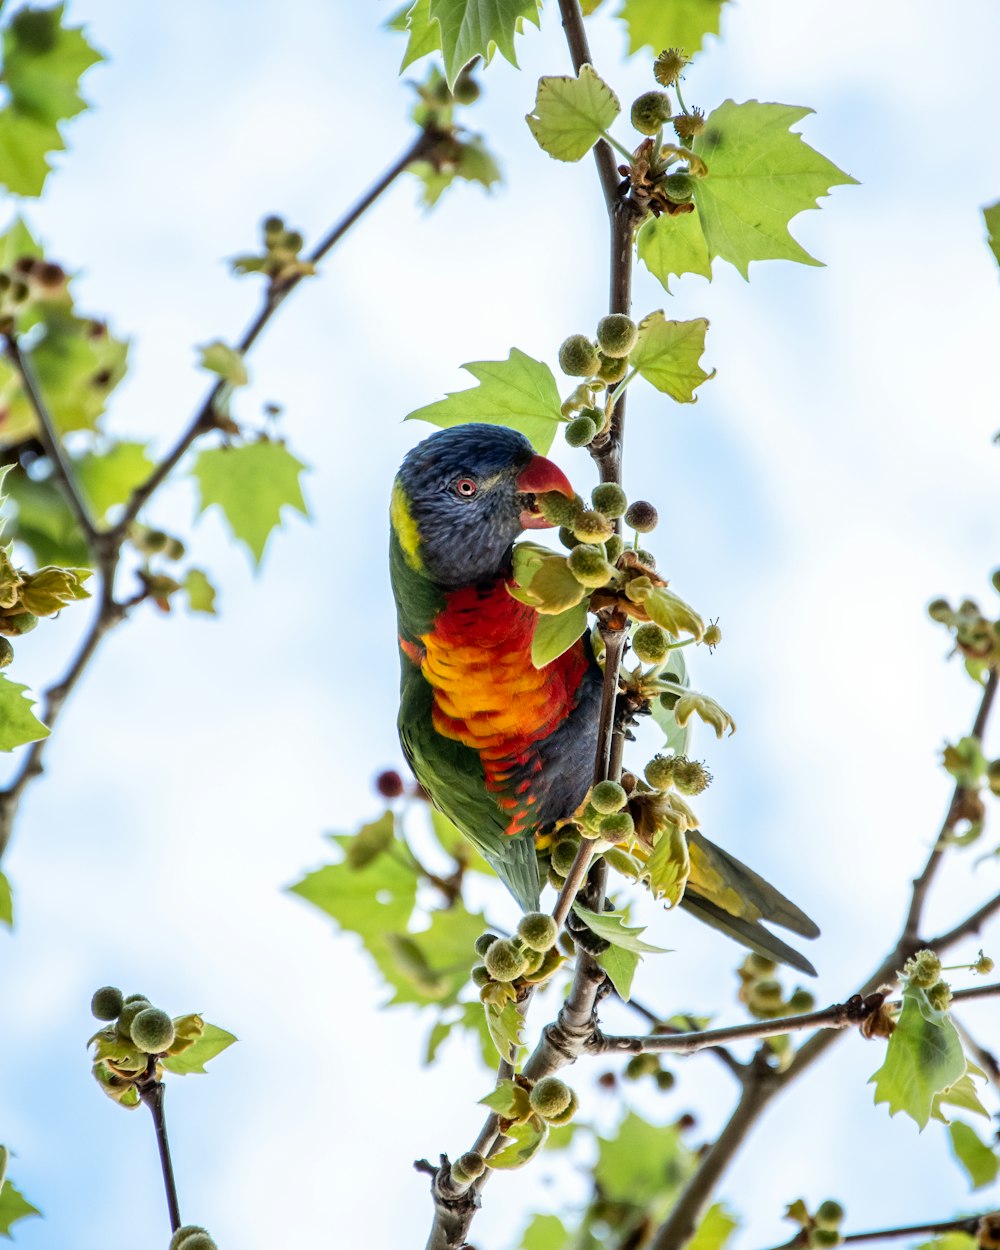 blue orange and green bird perched on tree branch during daytime